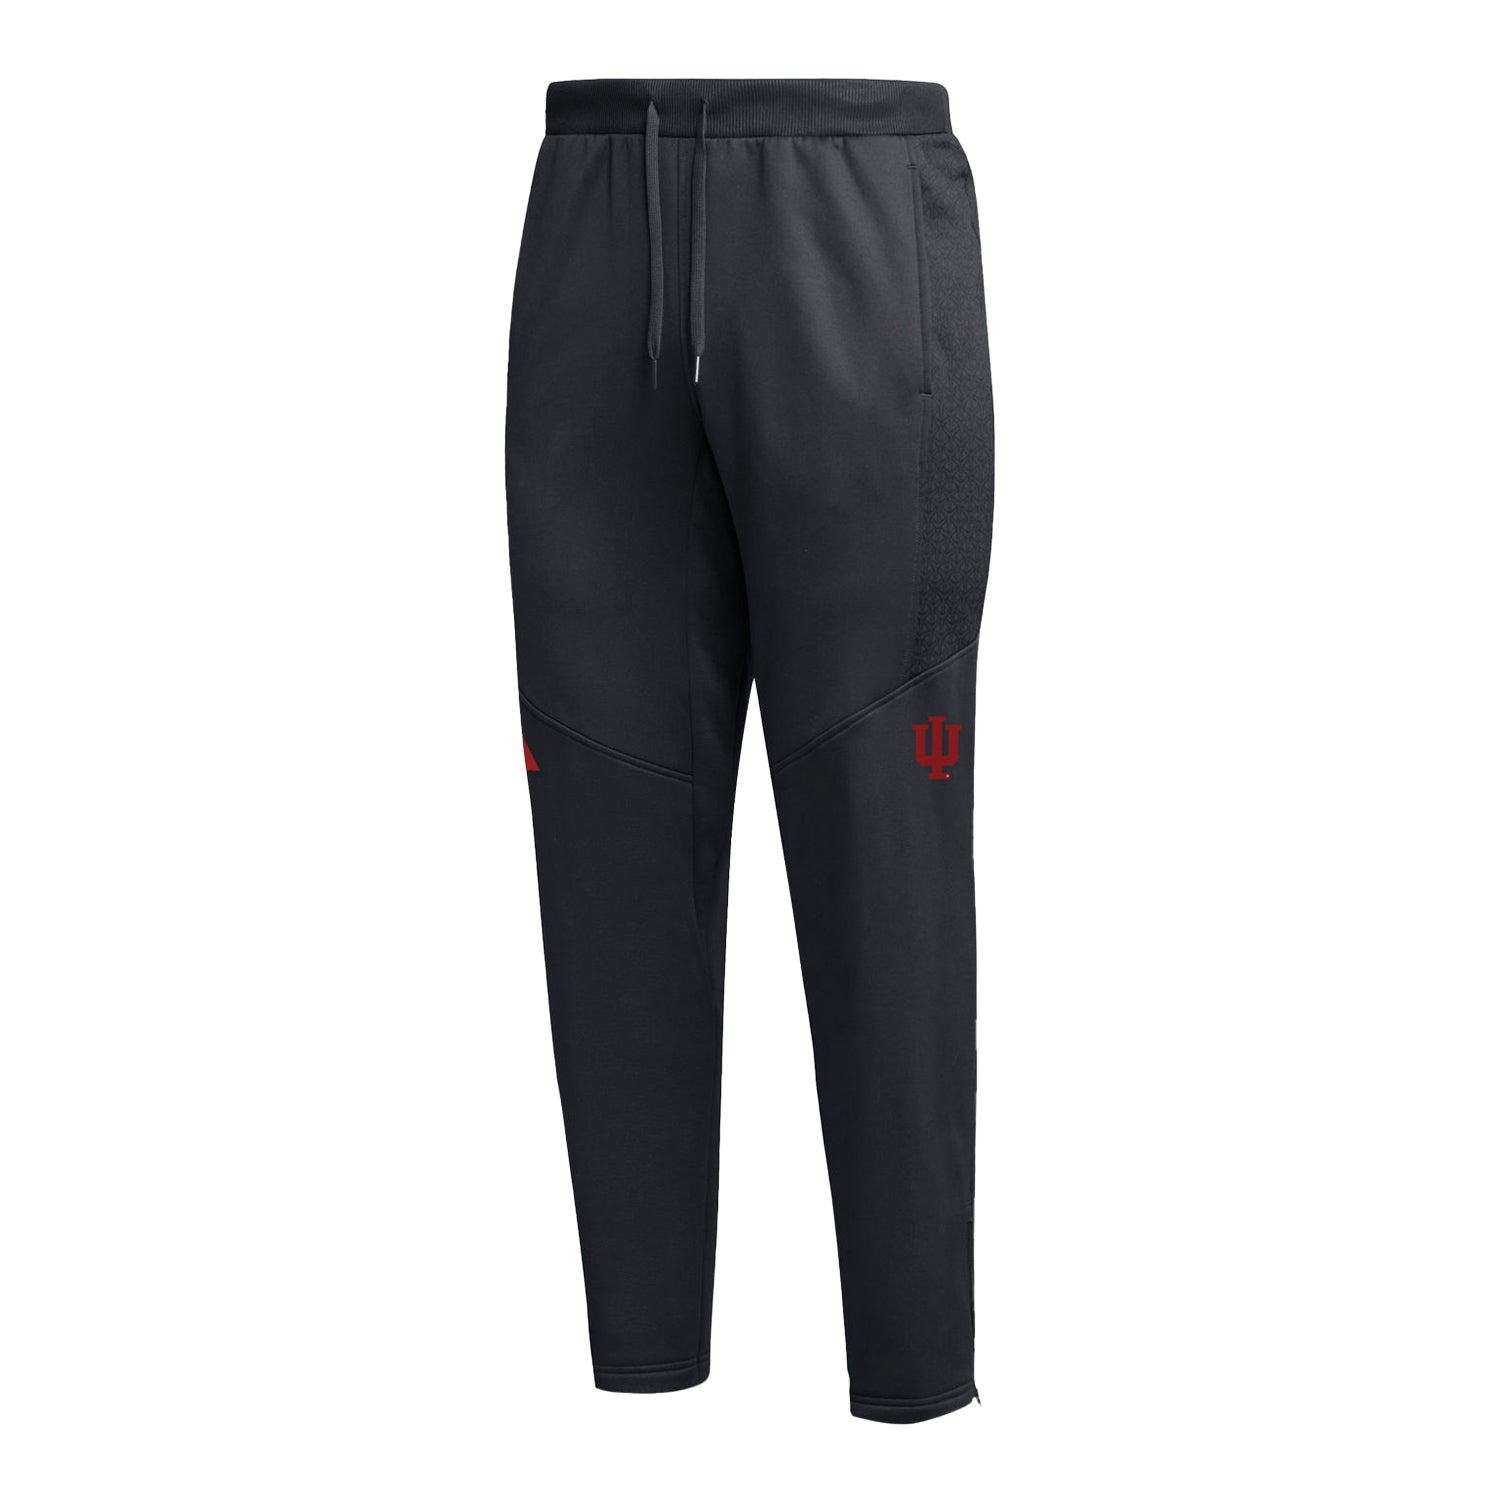 Indiana Hoosiers Adidas Sideline Tapered Black Pant - Official Indiana ...